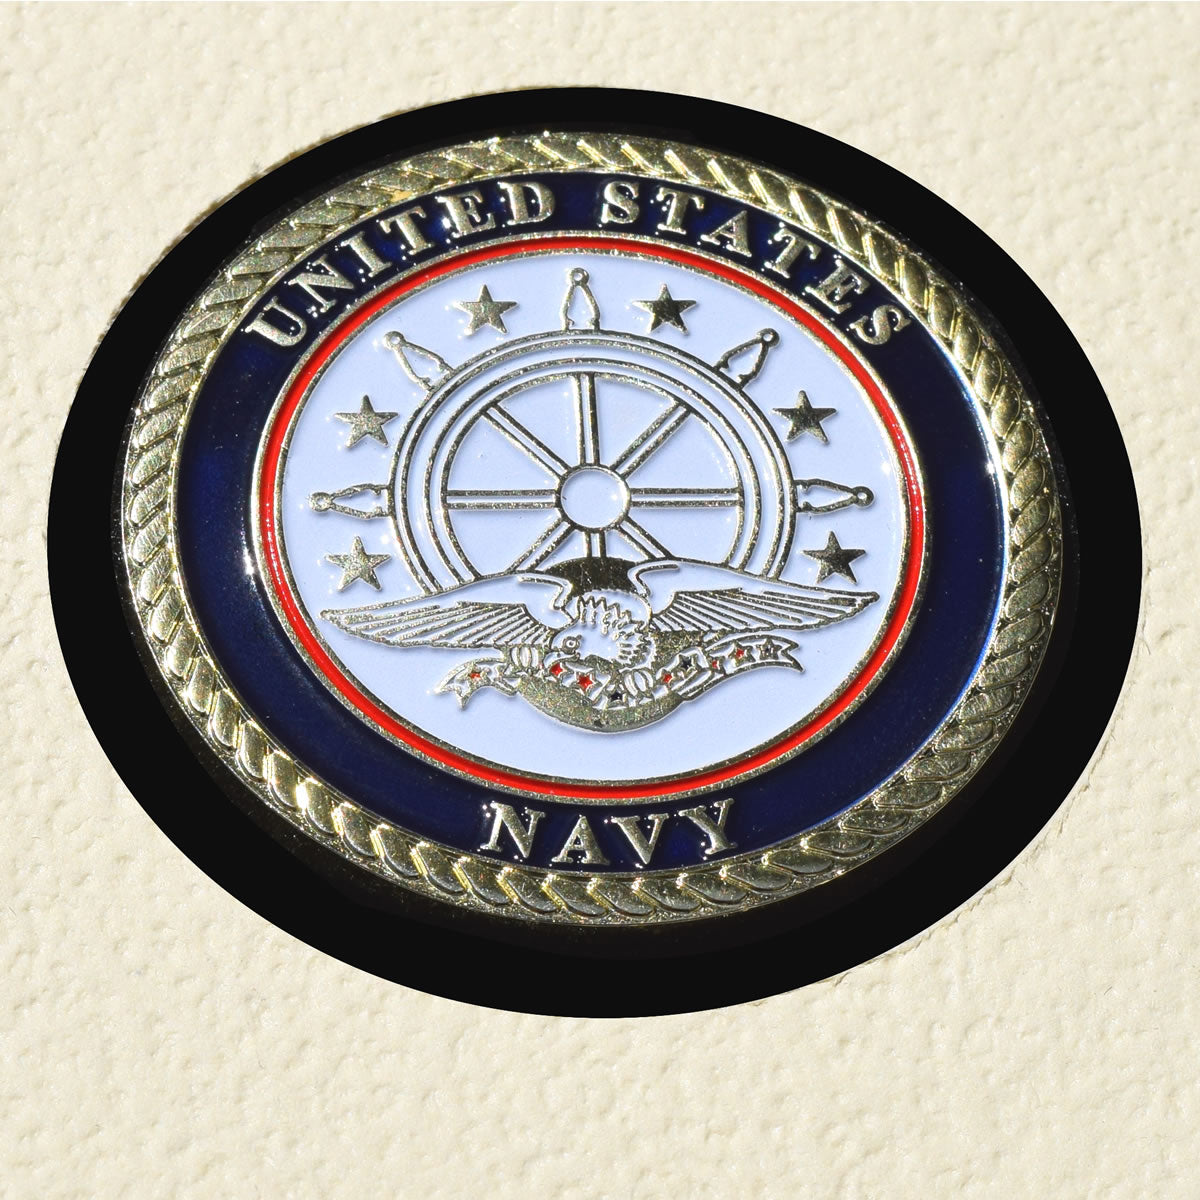 USS NEWMAN K PERRY DD-883 Detailed Coin